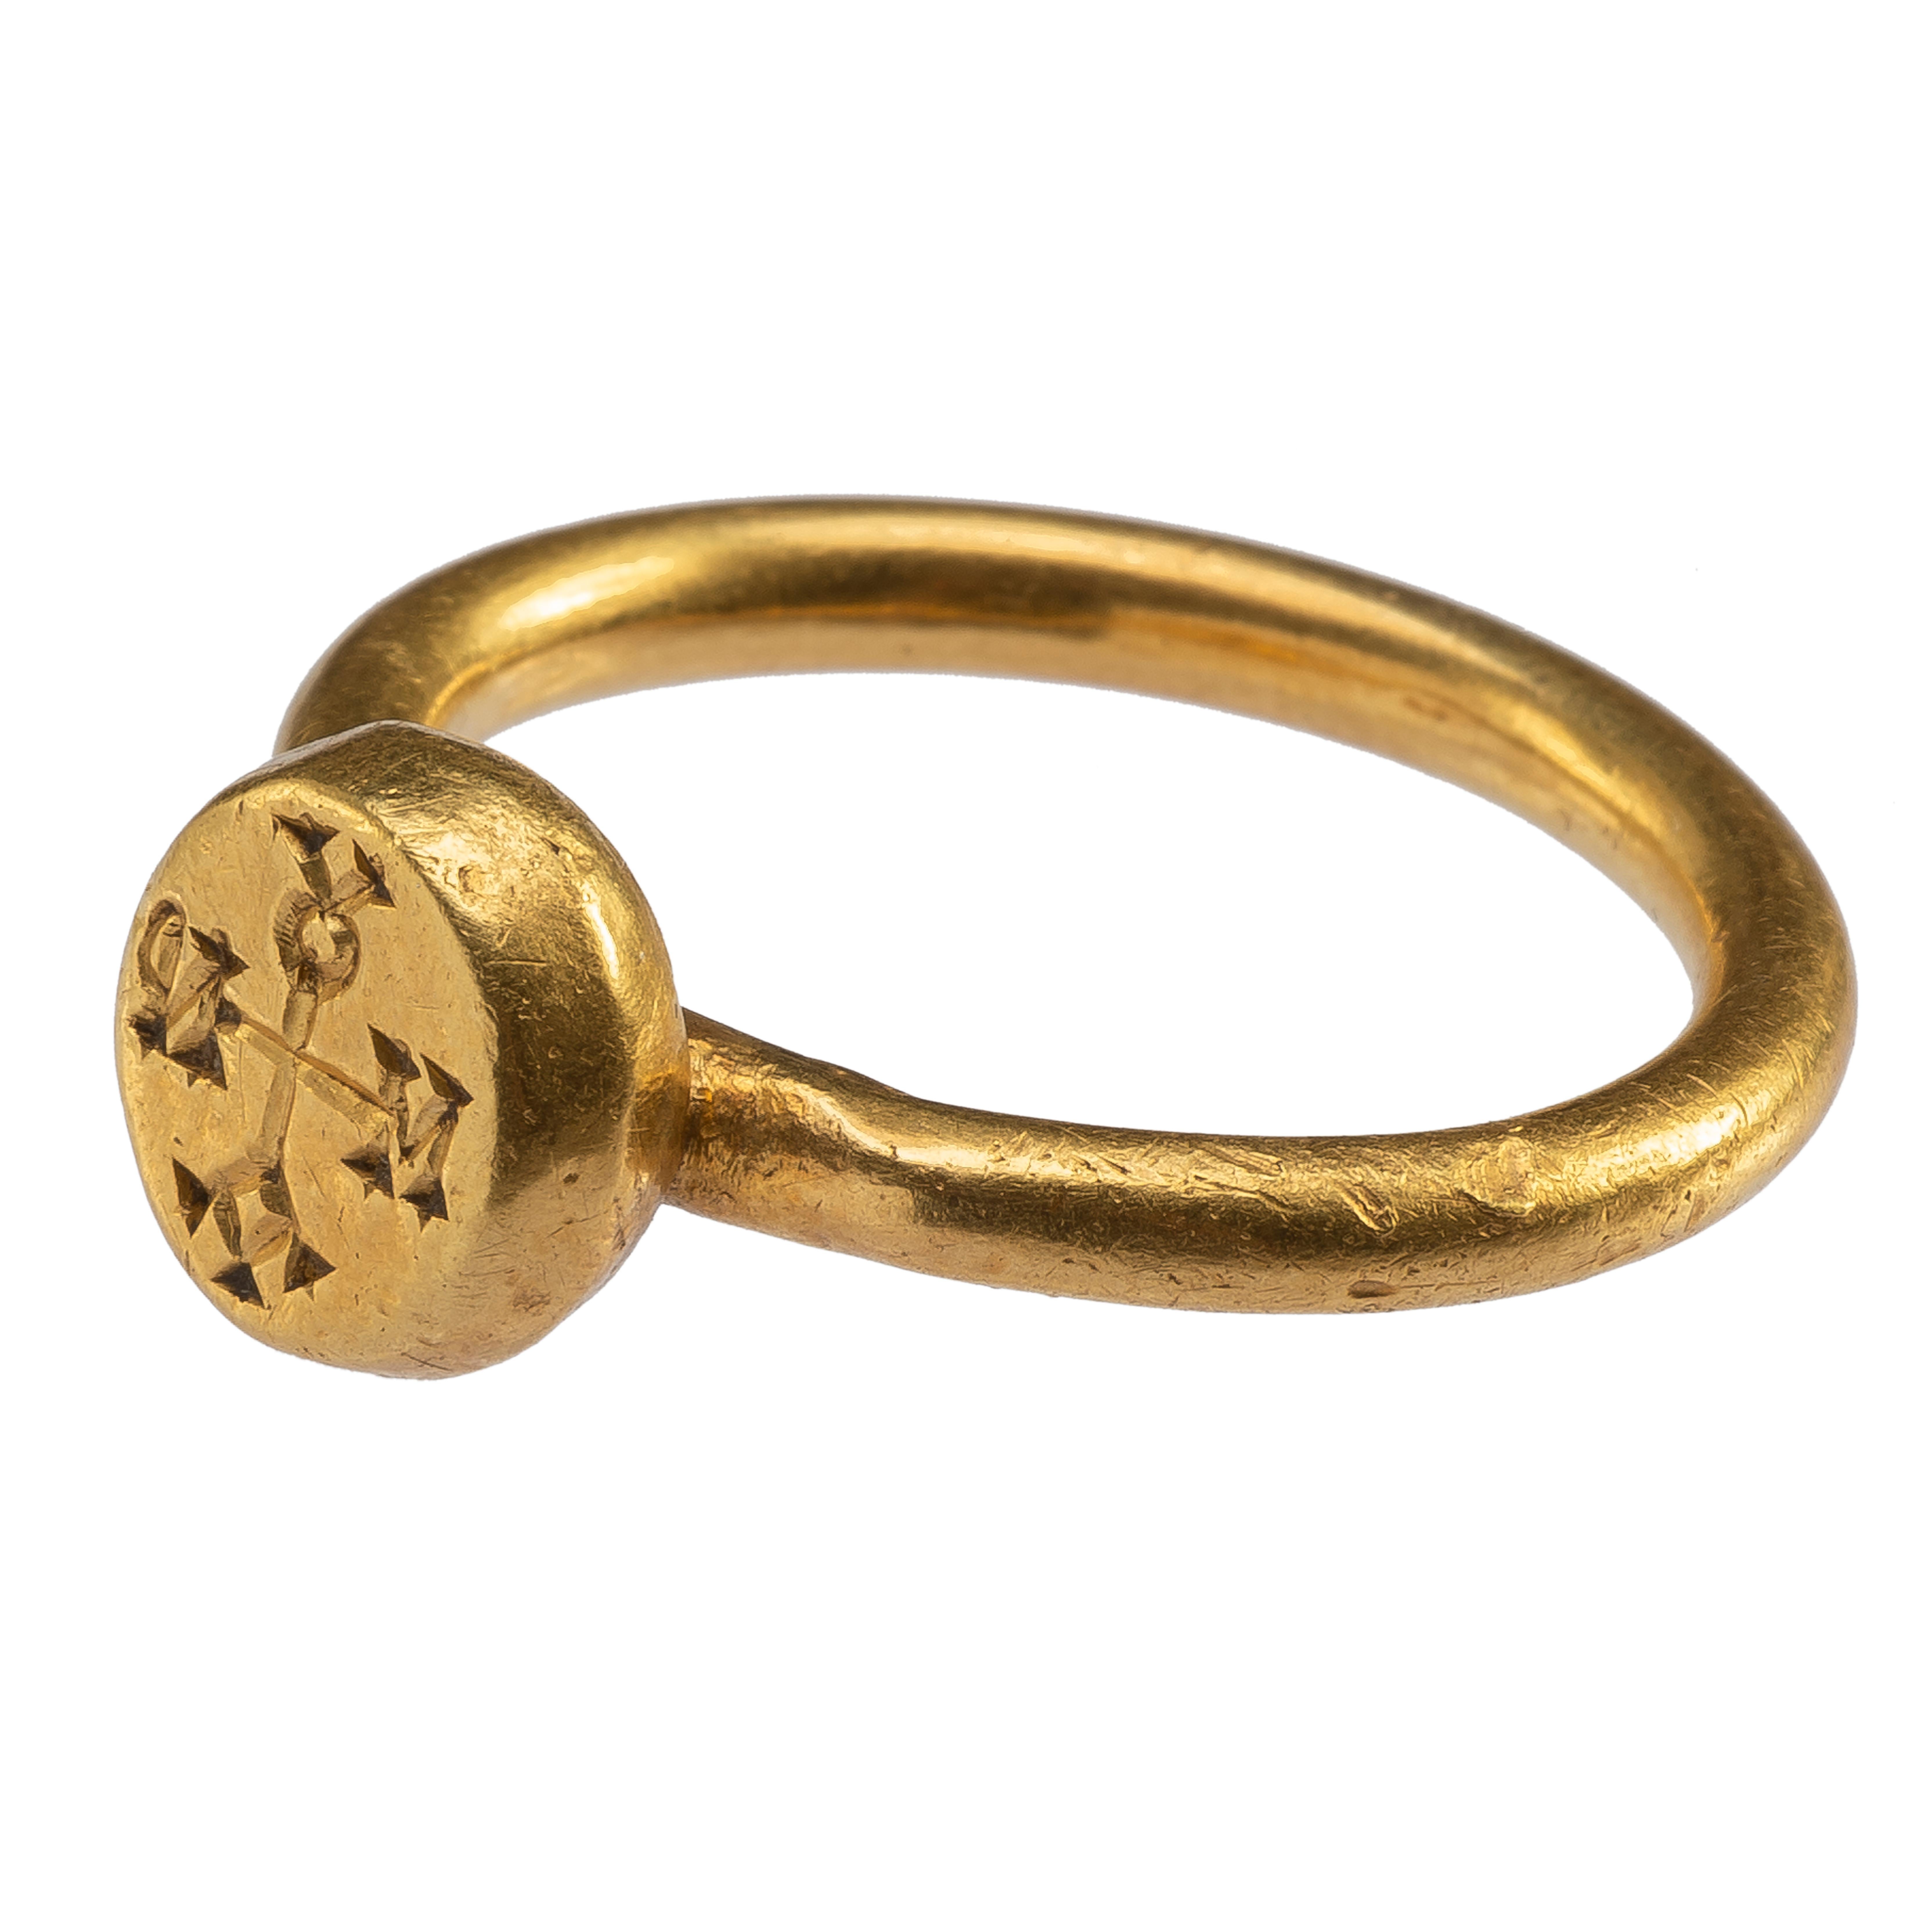 Byzantine Ring with Cruciform Monogram  
Early Byzantine,  mid-6th - 7th century  
Gold  
Weight 11.6 gr.; Circumference 60.38 mm.; US size 9 1/4; UK size S 1/4  

A gold ring with hoop in round section, which is slightly flattened on top to support